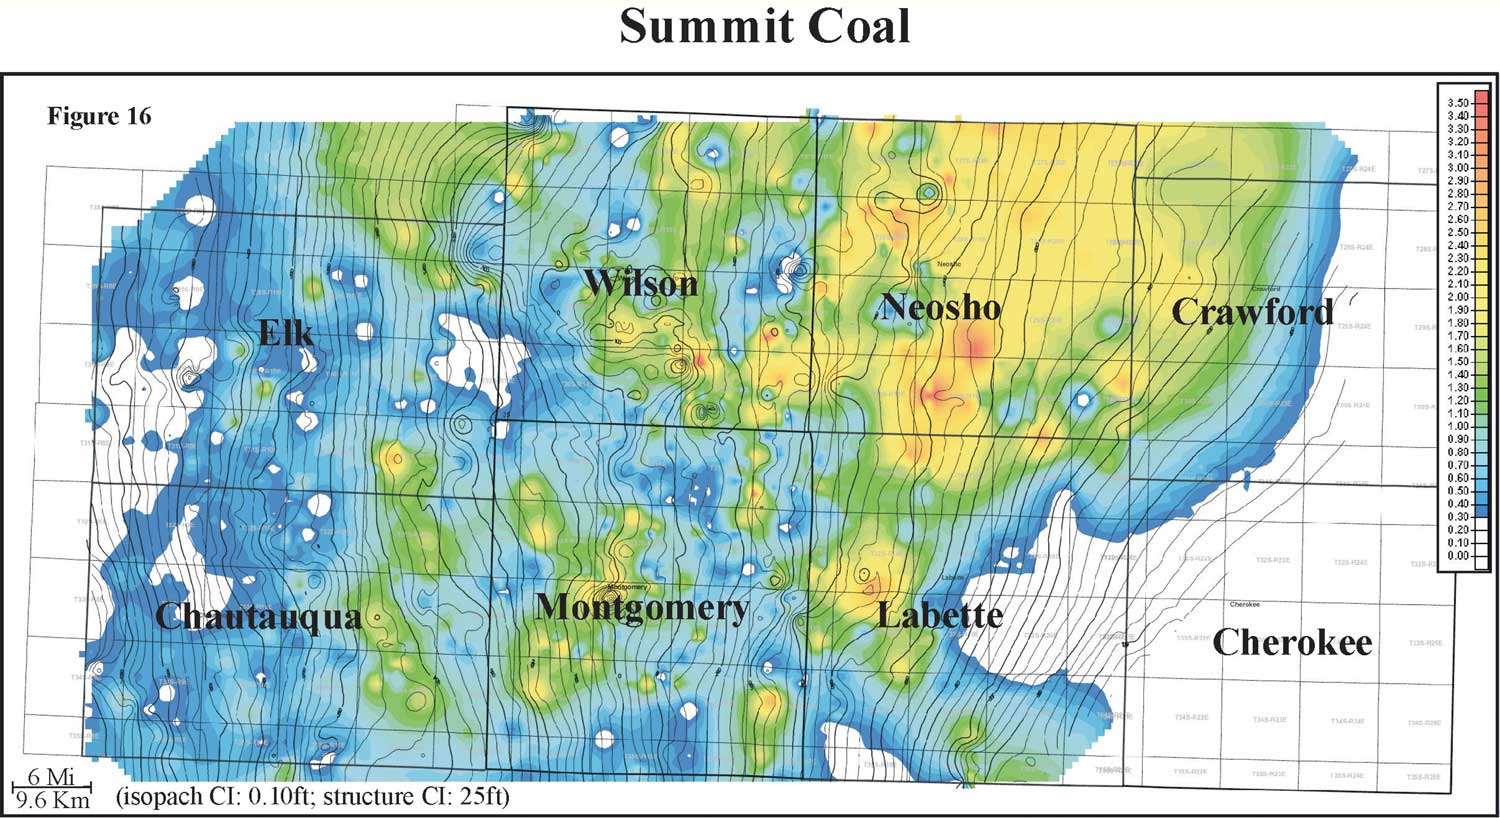 color isopach map of Summit coal overlain by contours of bottom of Summit